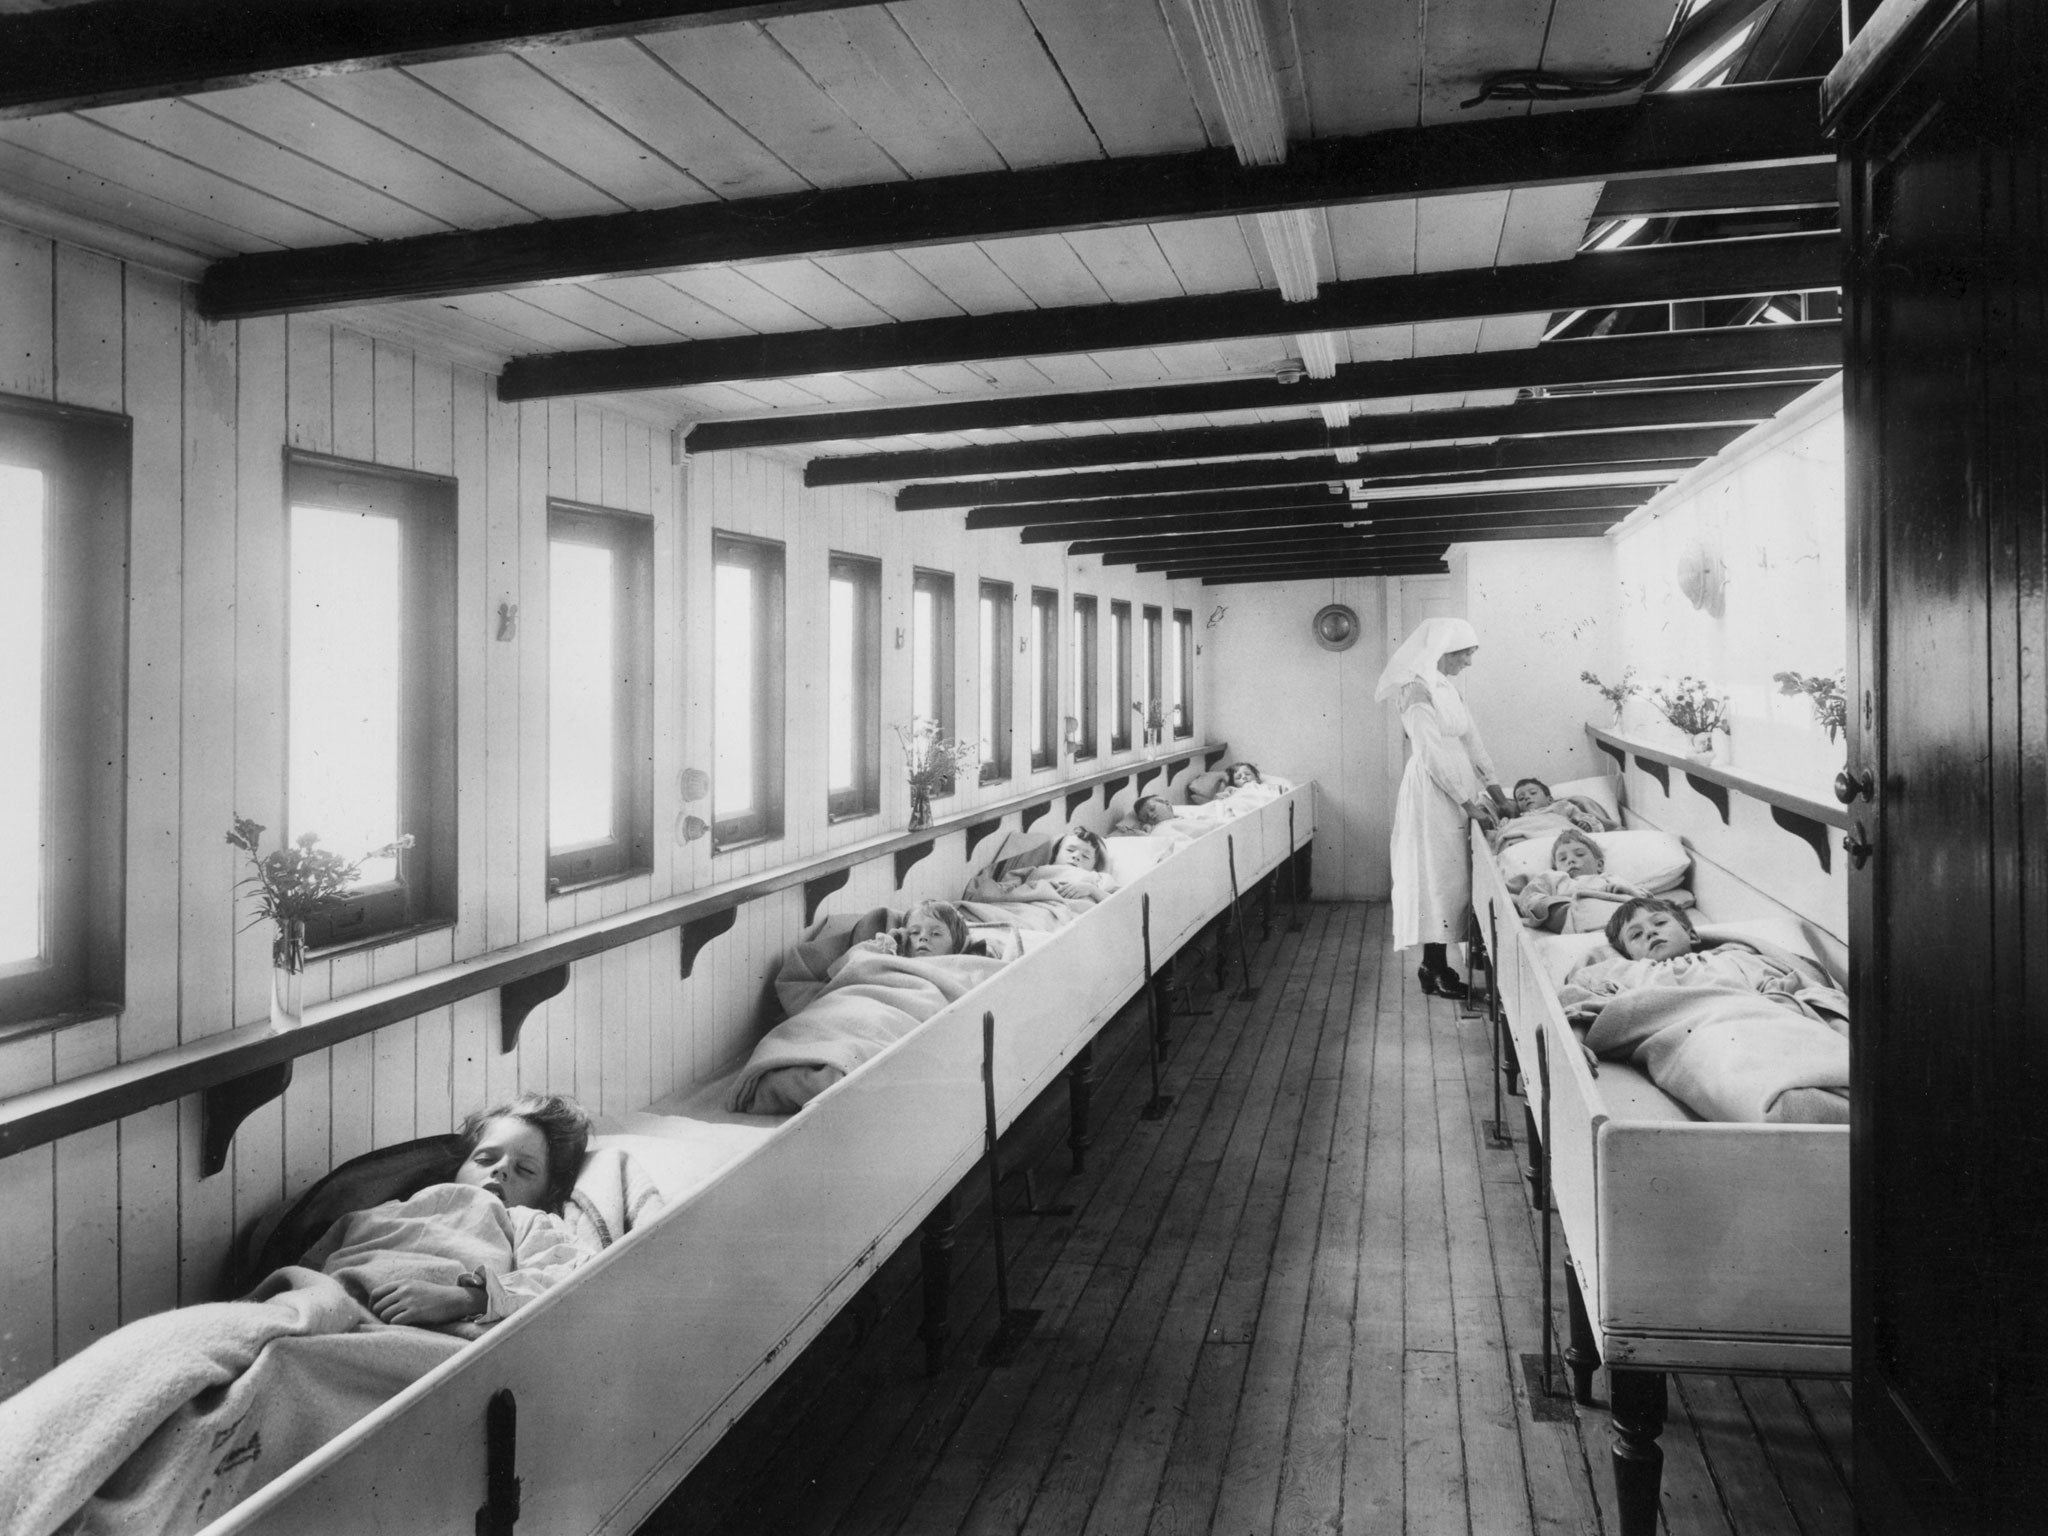 Young patients in 1922 in a river ambulance for sufferers of infectious diseases such as TB